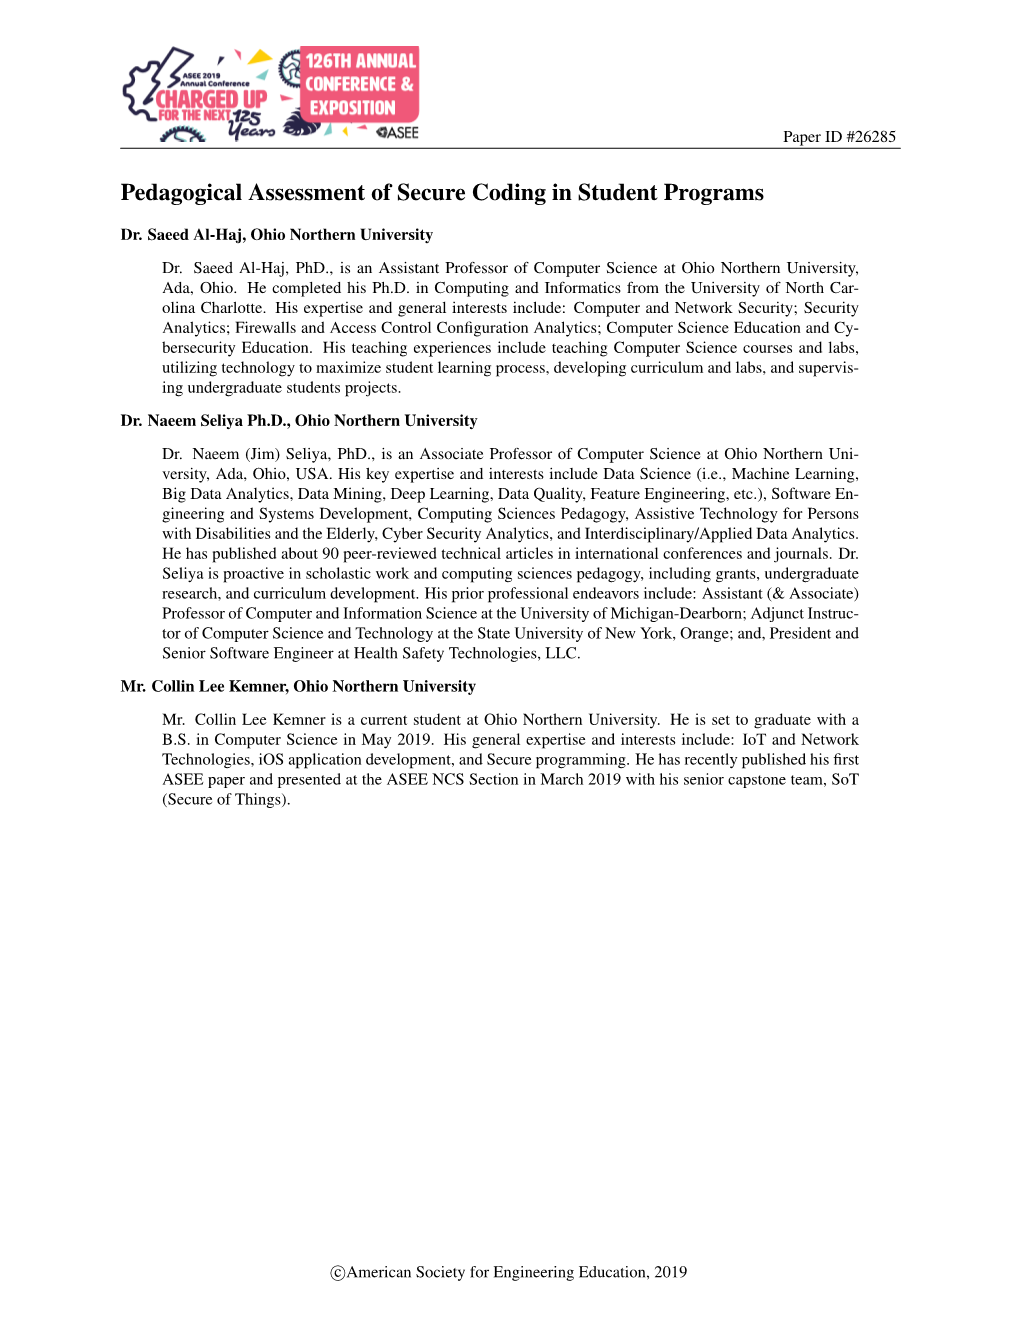 Pedagogical Assessment of Secure Coding in Student Programs